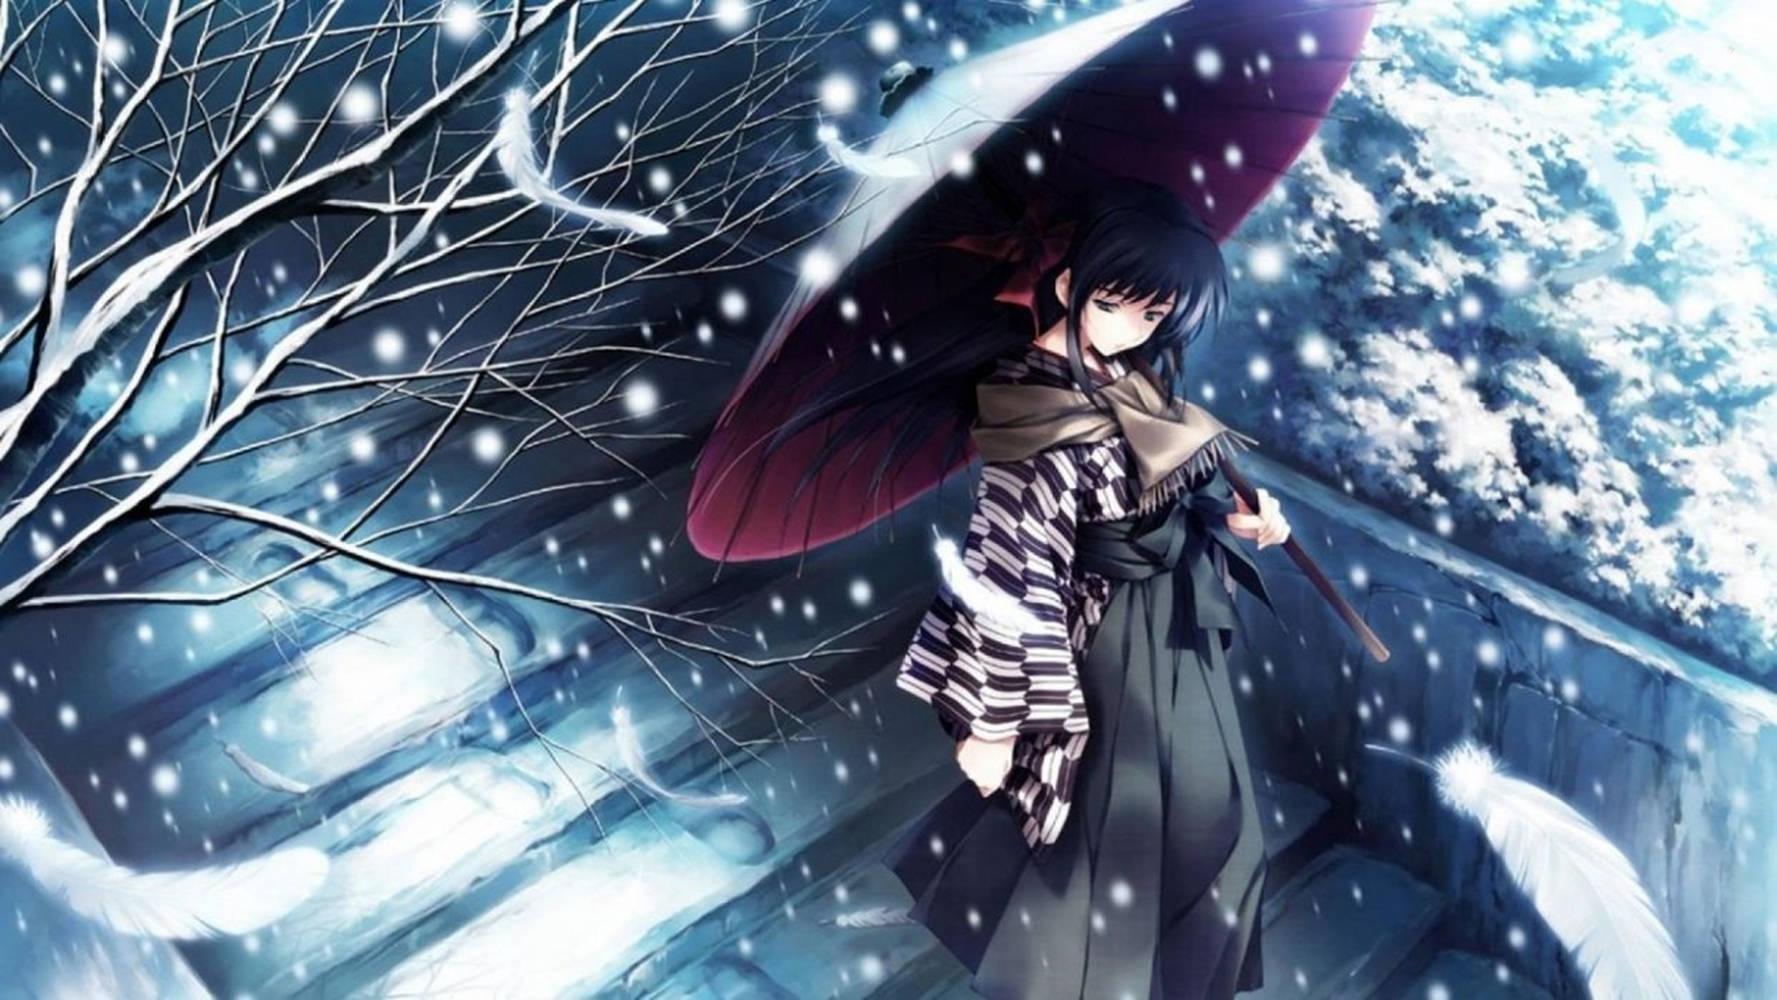 Anime Girl Sad Alone With Parasol Winter Aesthetic